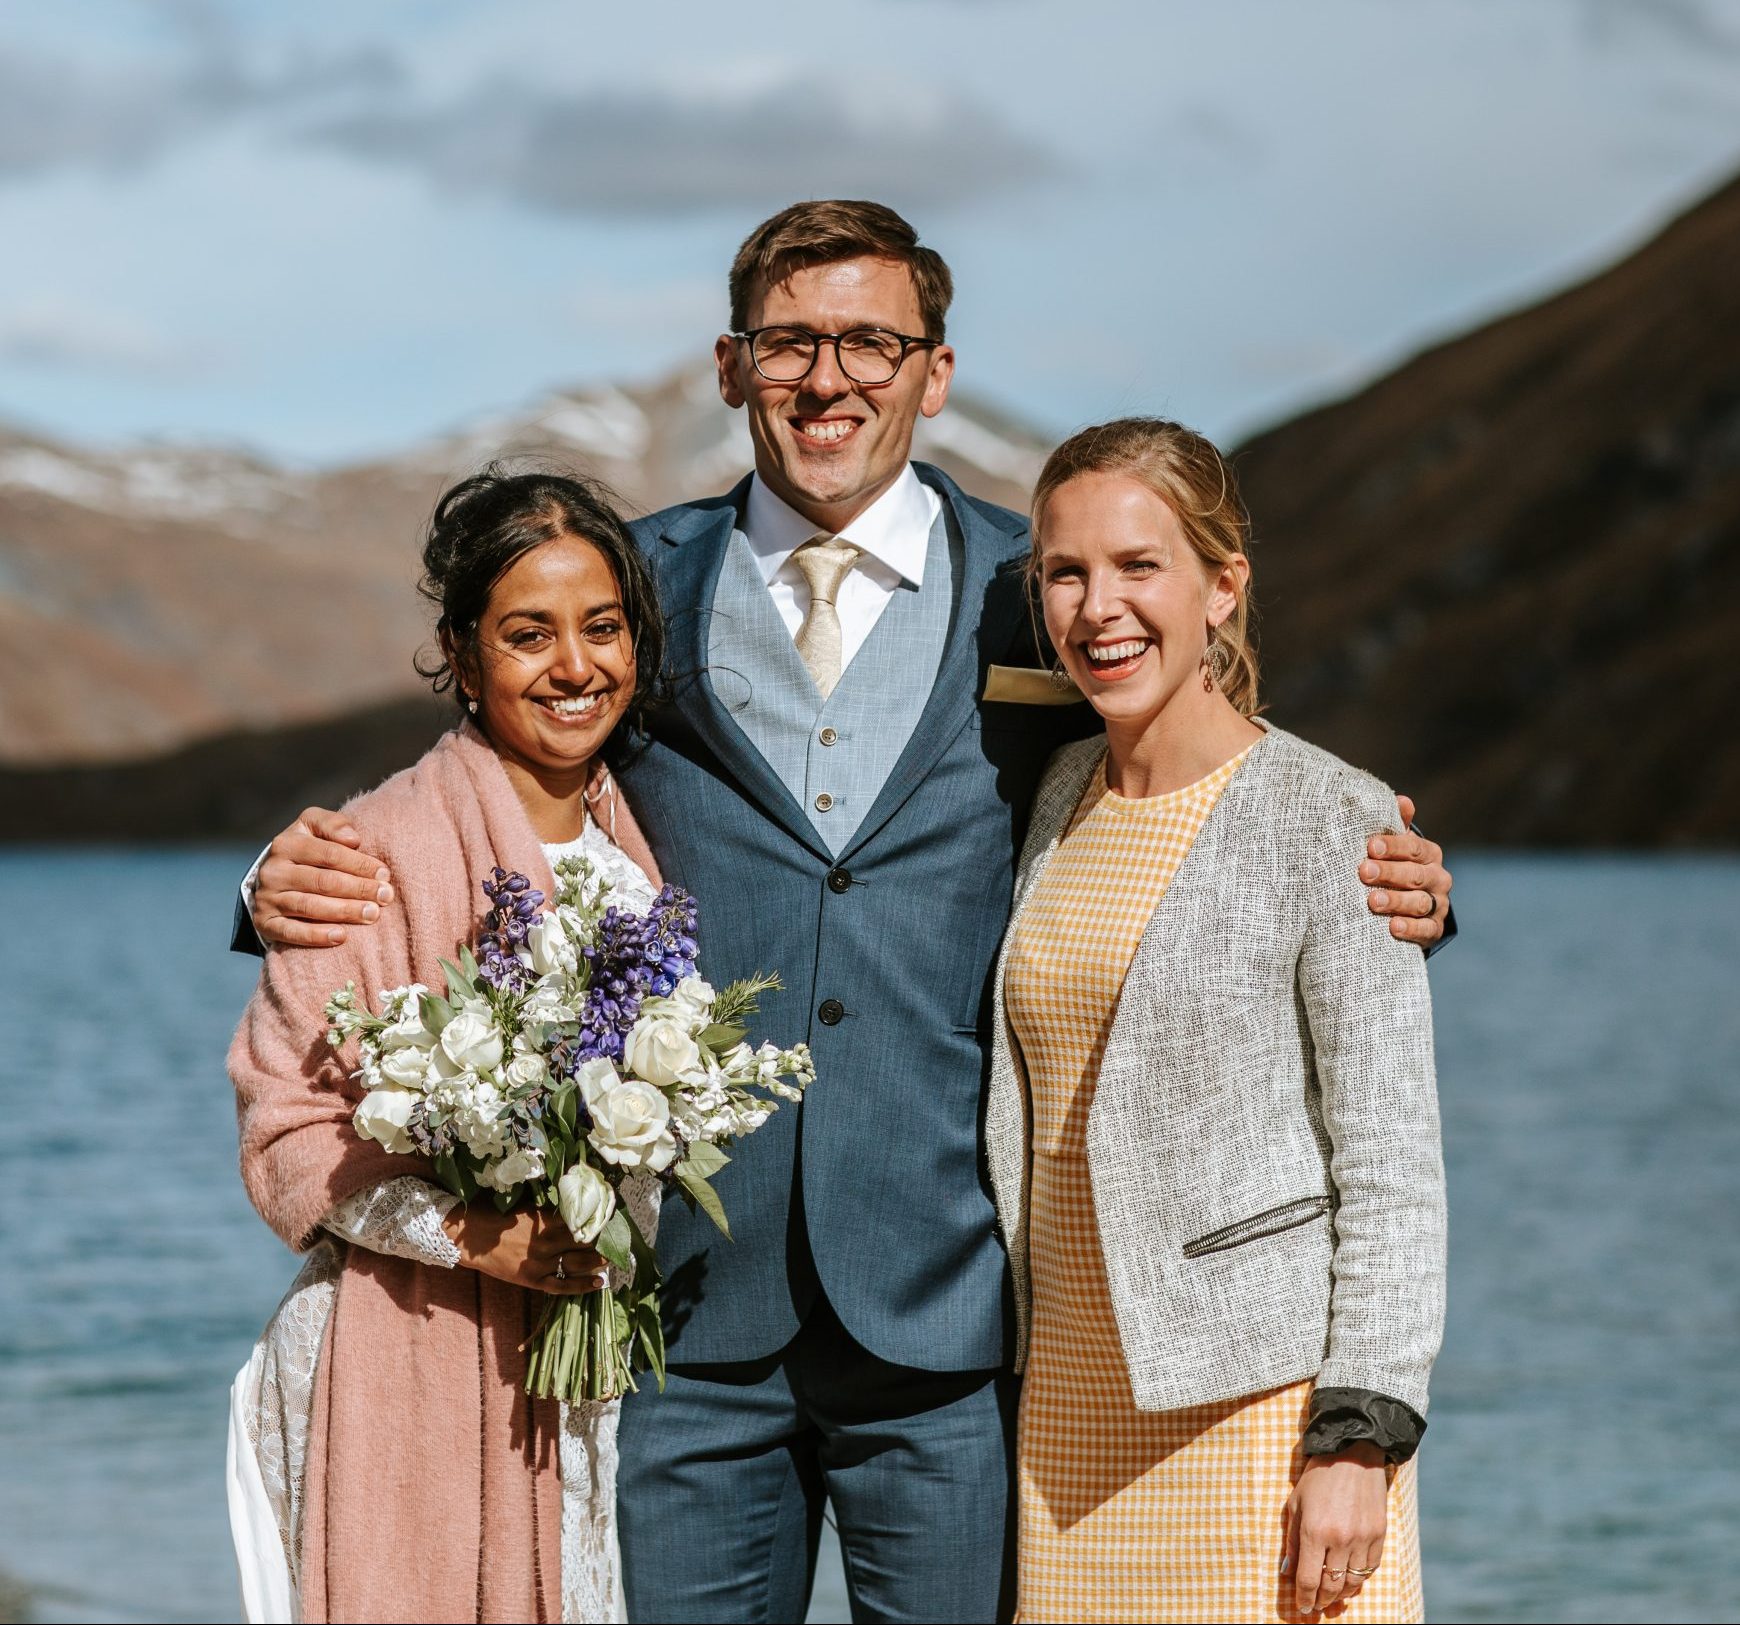 Wanaka helicopter elopment to Lochnagar, post ceremony wedding photo with marriage celebrant Siobhain the Celebrant laughing and smiling with couple with Lochnagar in the background. Bride is holding flowers and draped in a shawl. Part of wedding package with Boutique Weddings NZ